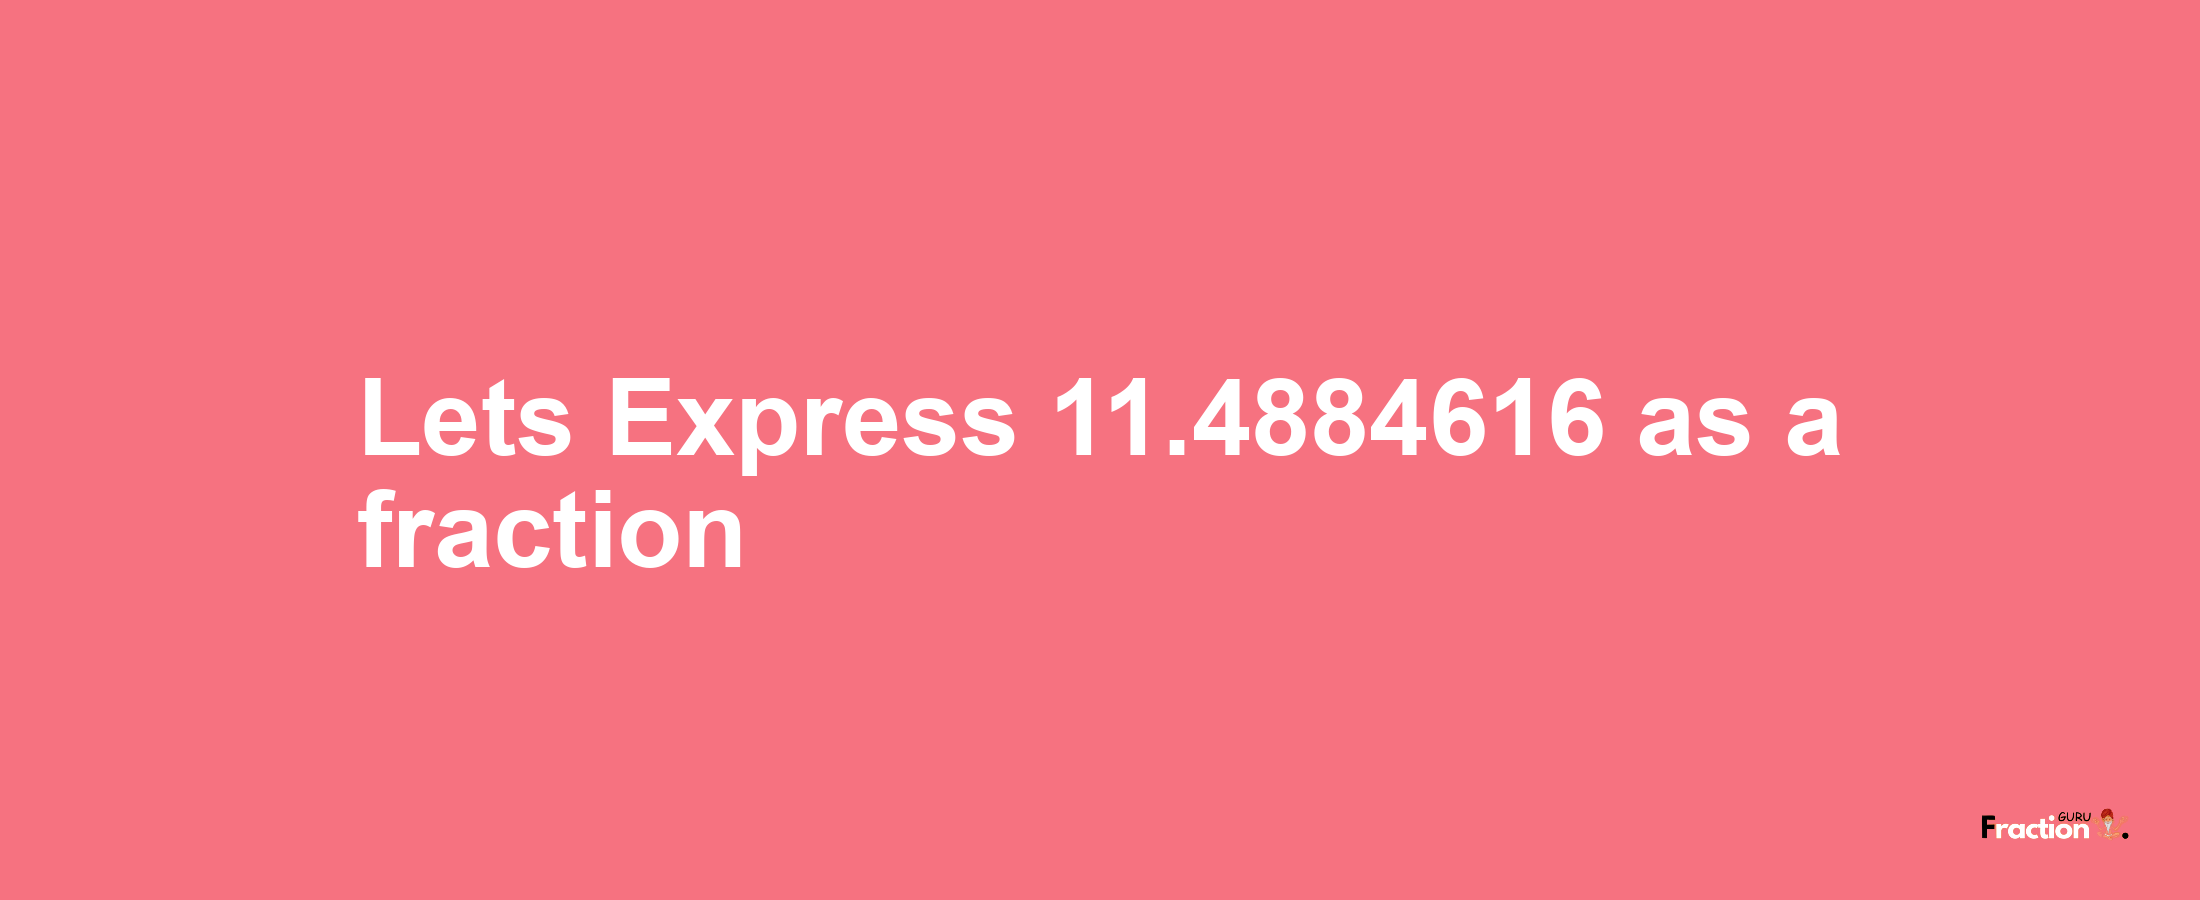 Lets Express 11.4884616 as afraction